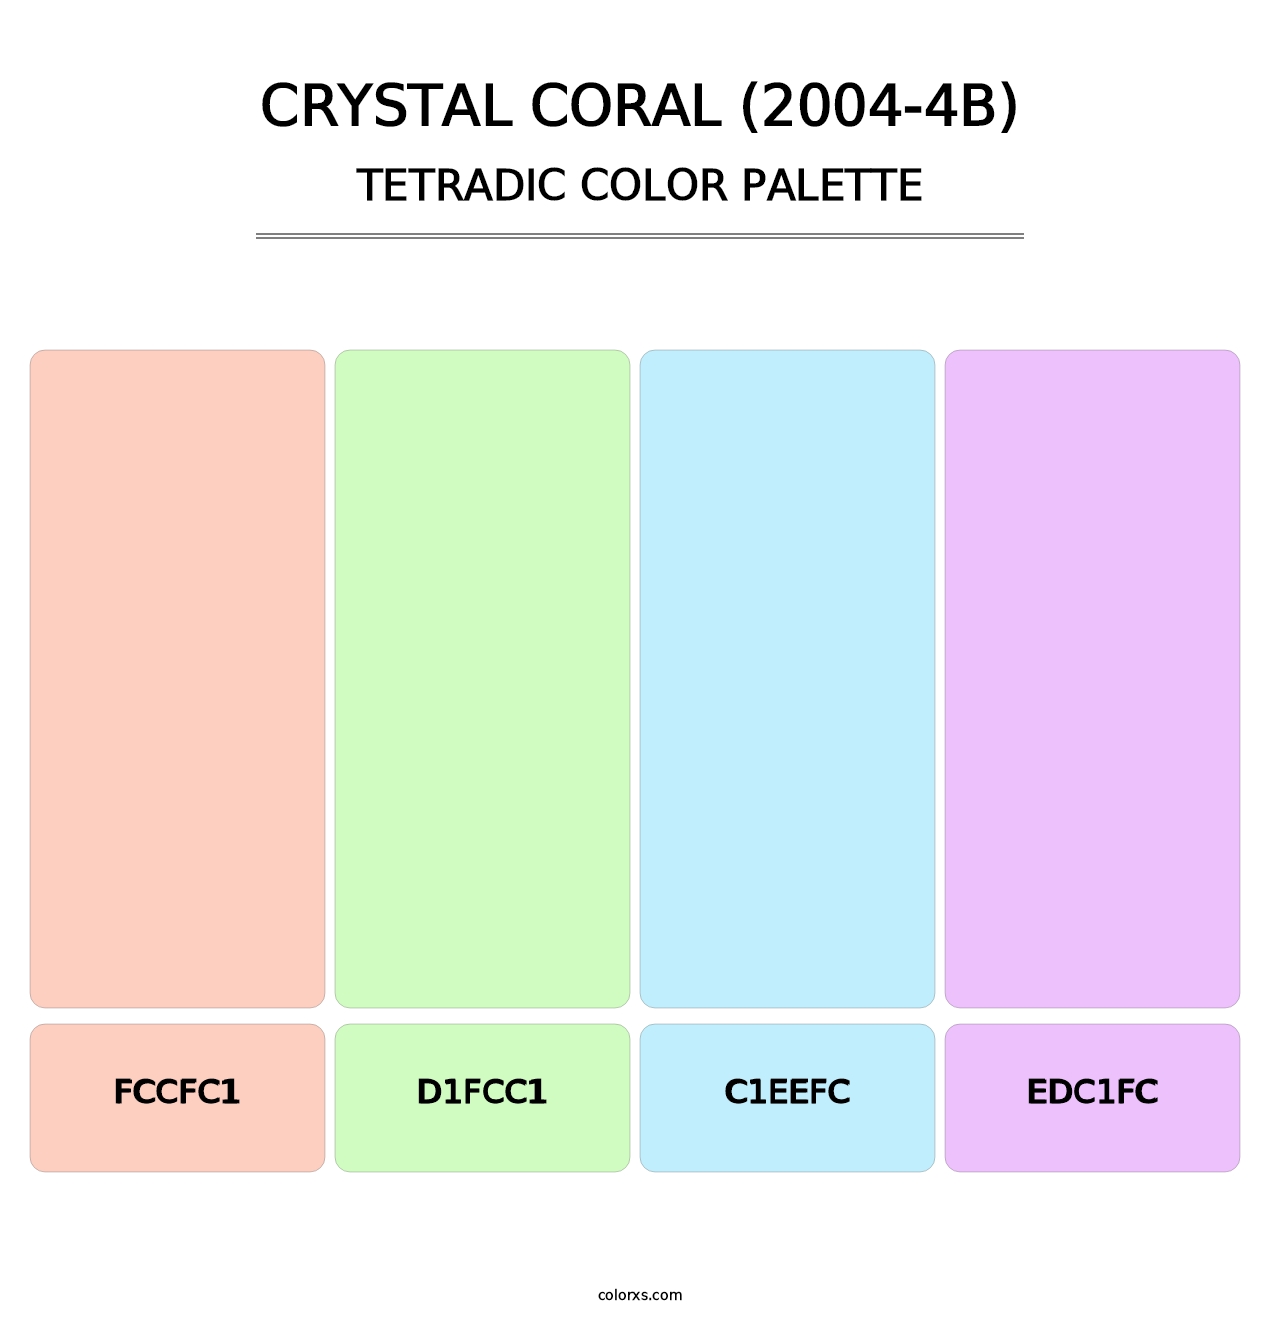 Crystal Coral (2004-4B) - Tetradic Color Palette